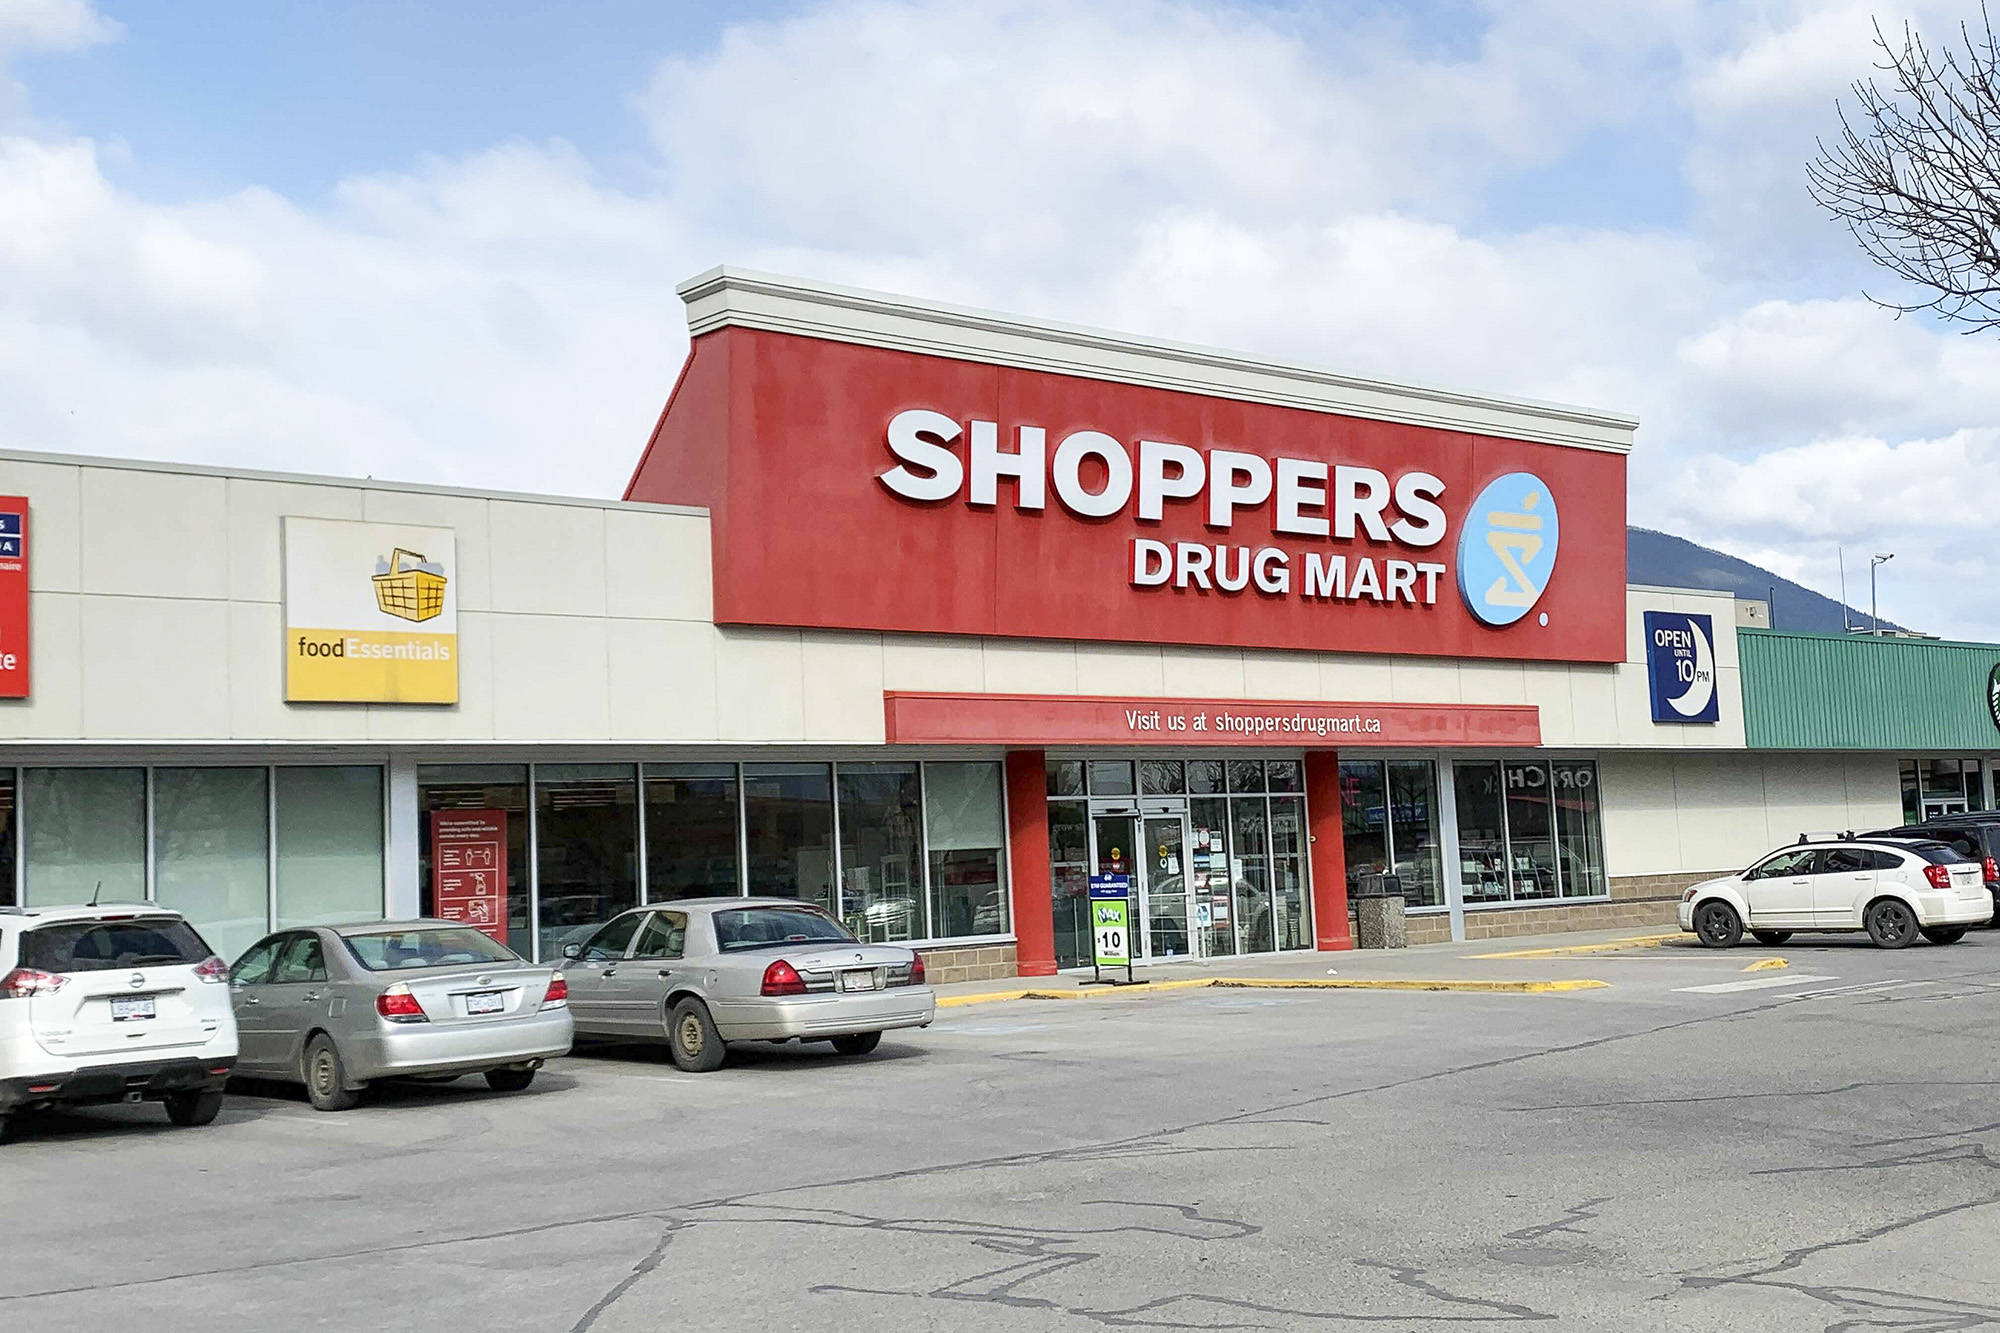 Shoppers Drug Mart notifies public of COVID case at Salmon Arm